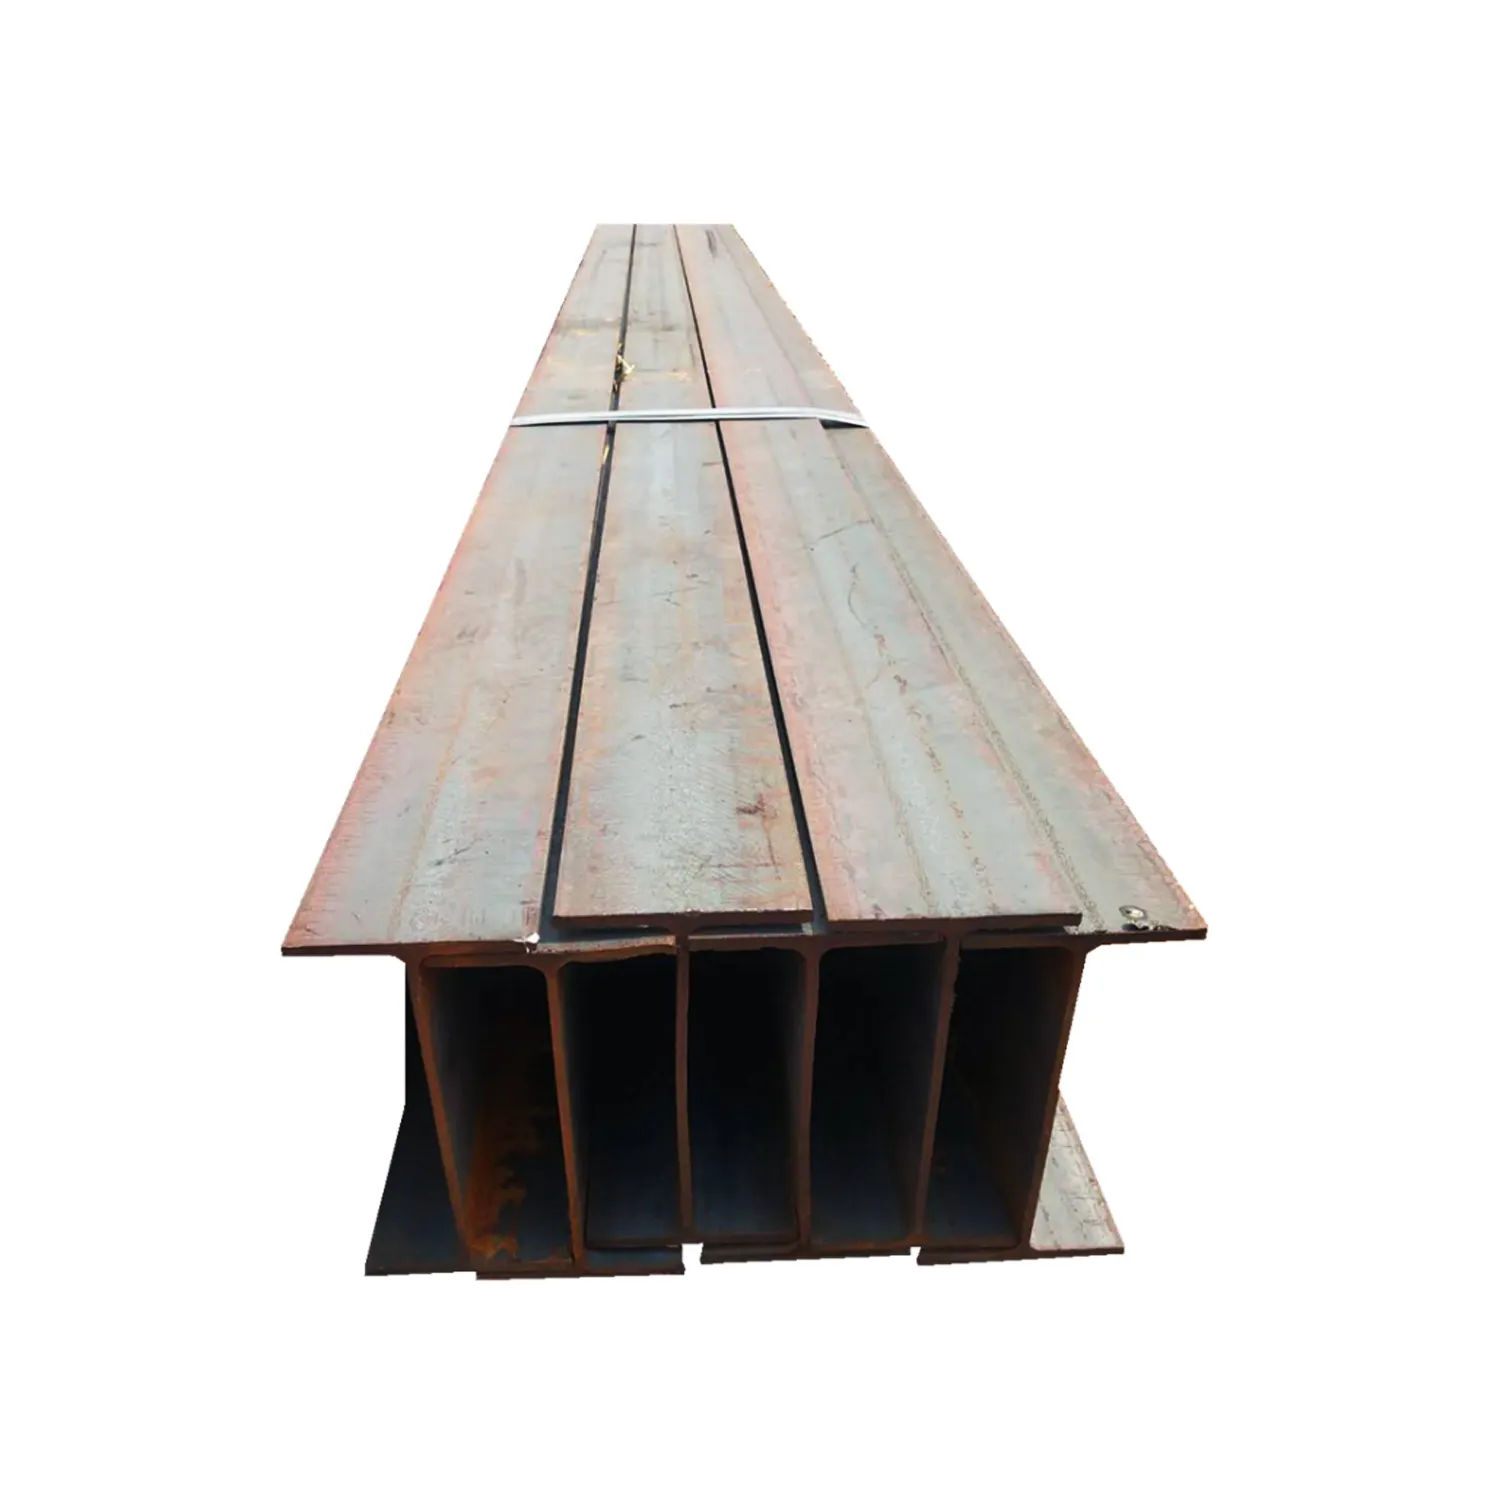 Construction Structural I Beam Ss400 Astm A36 H Section Hot Rolled Iron Carbon Mild Black Steel H-beam